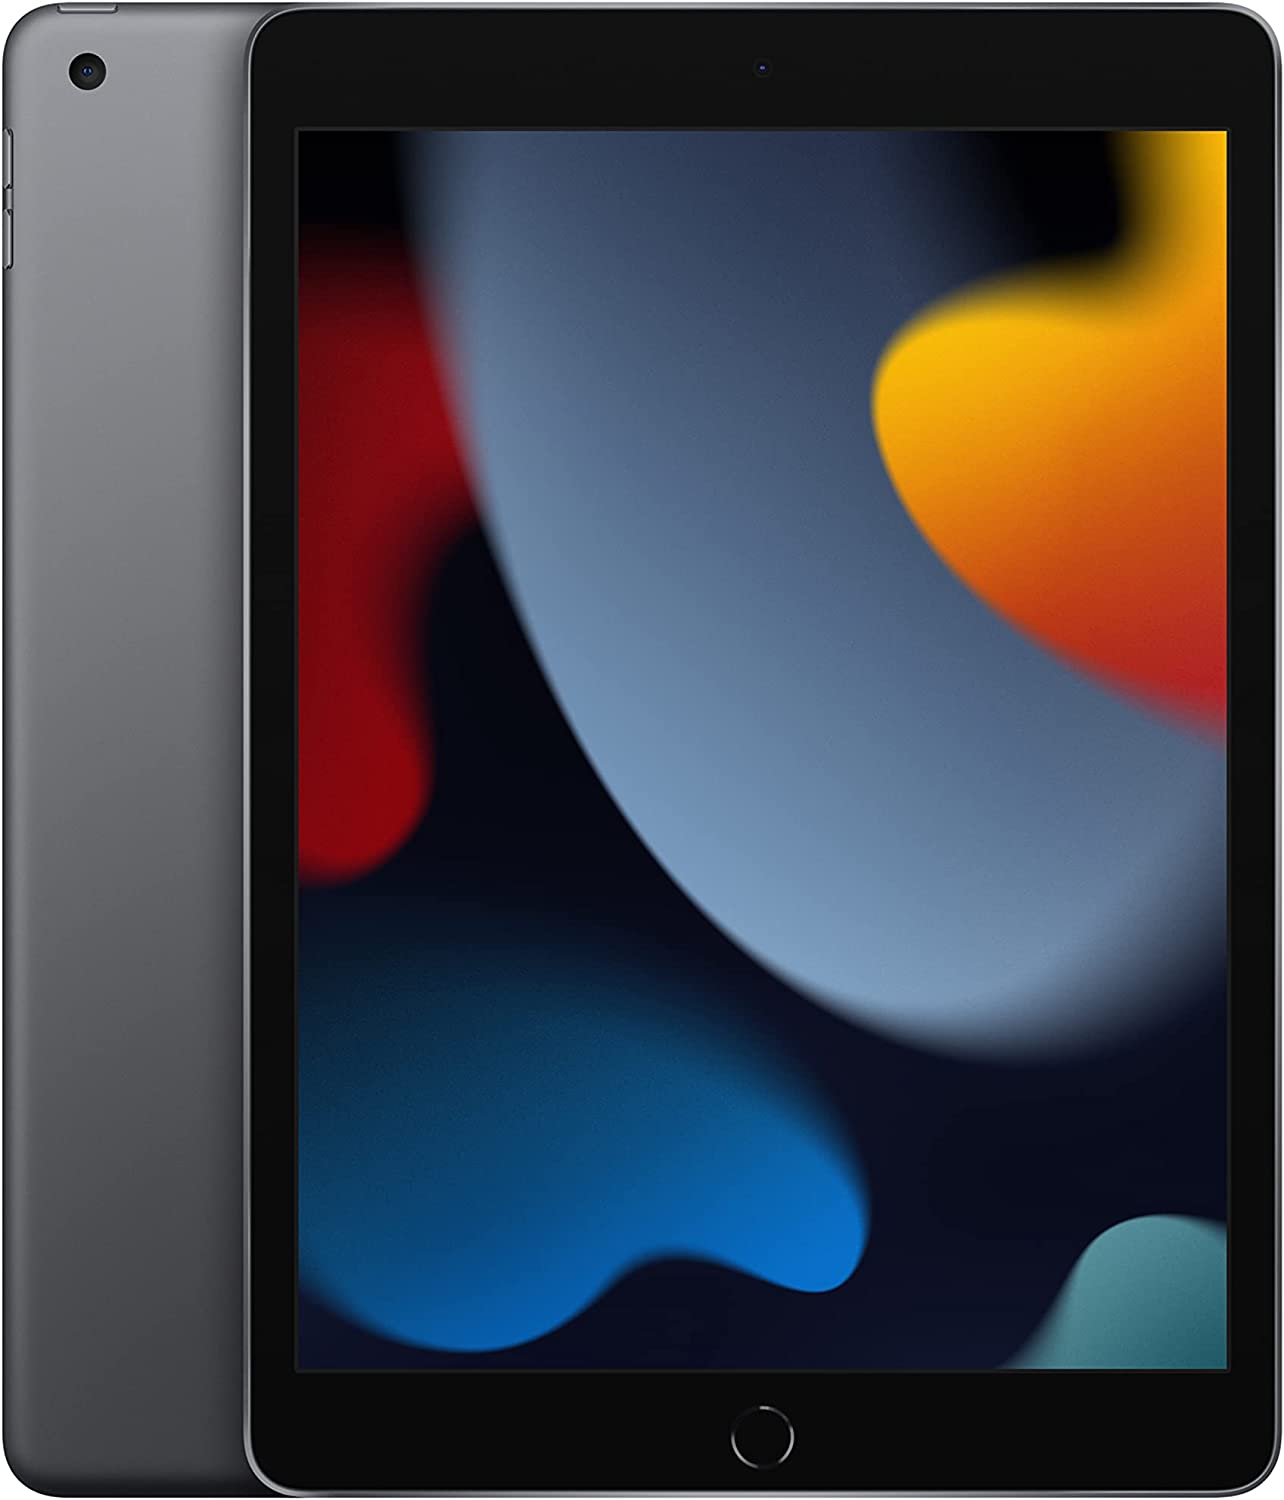 Apple iPad (9th Generation): with A13 Bionic chip, 10.2-inch